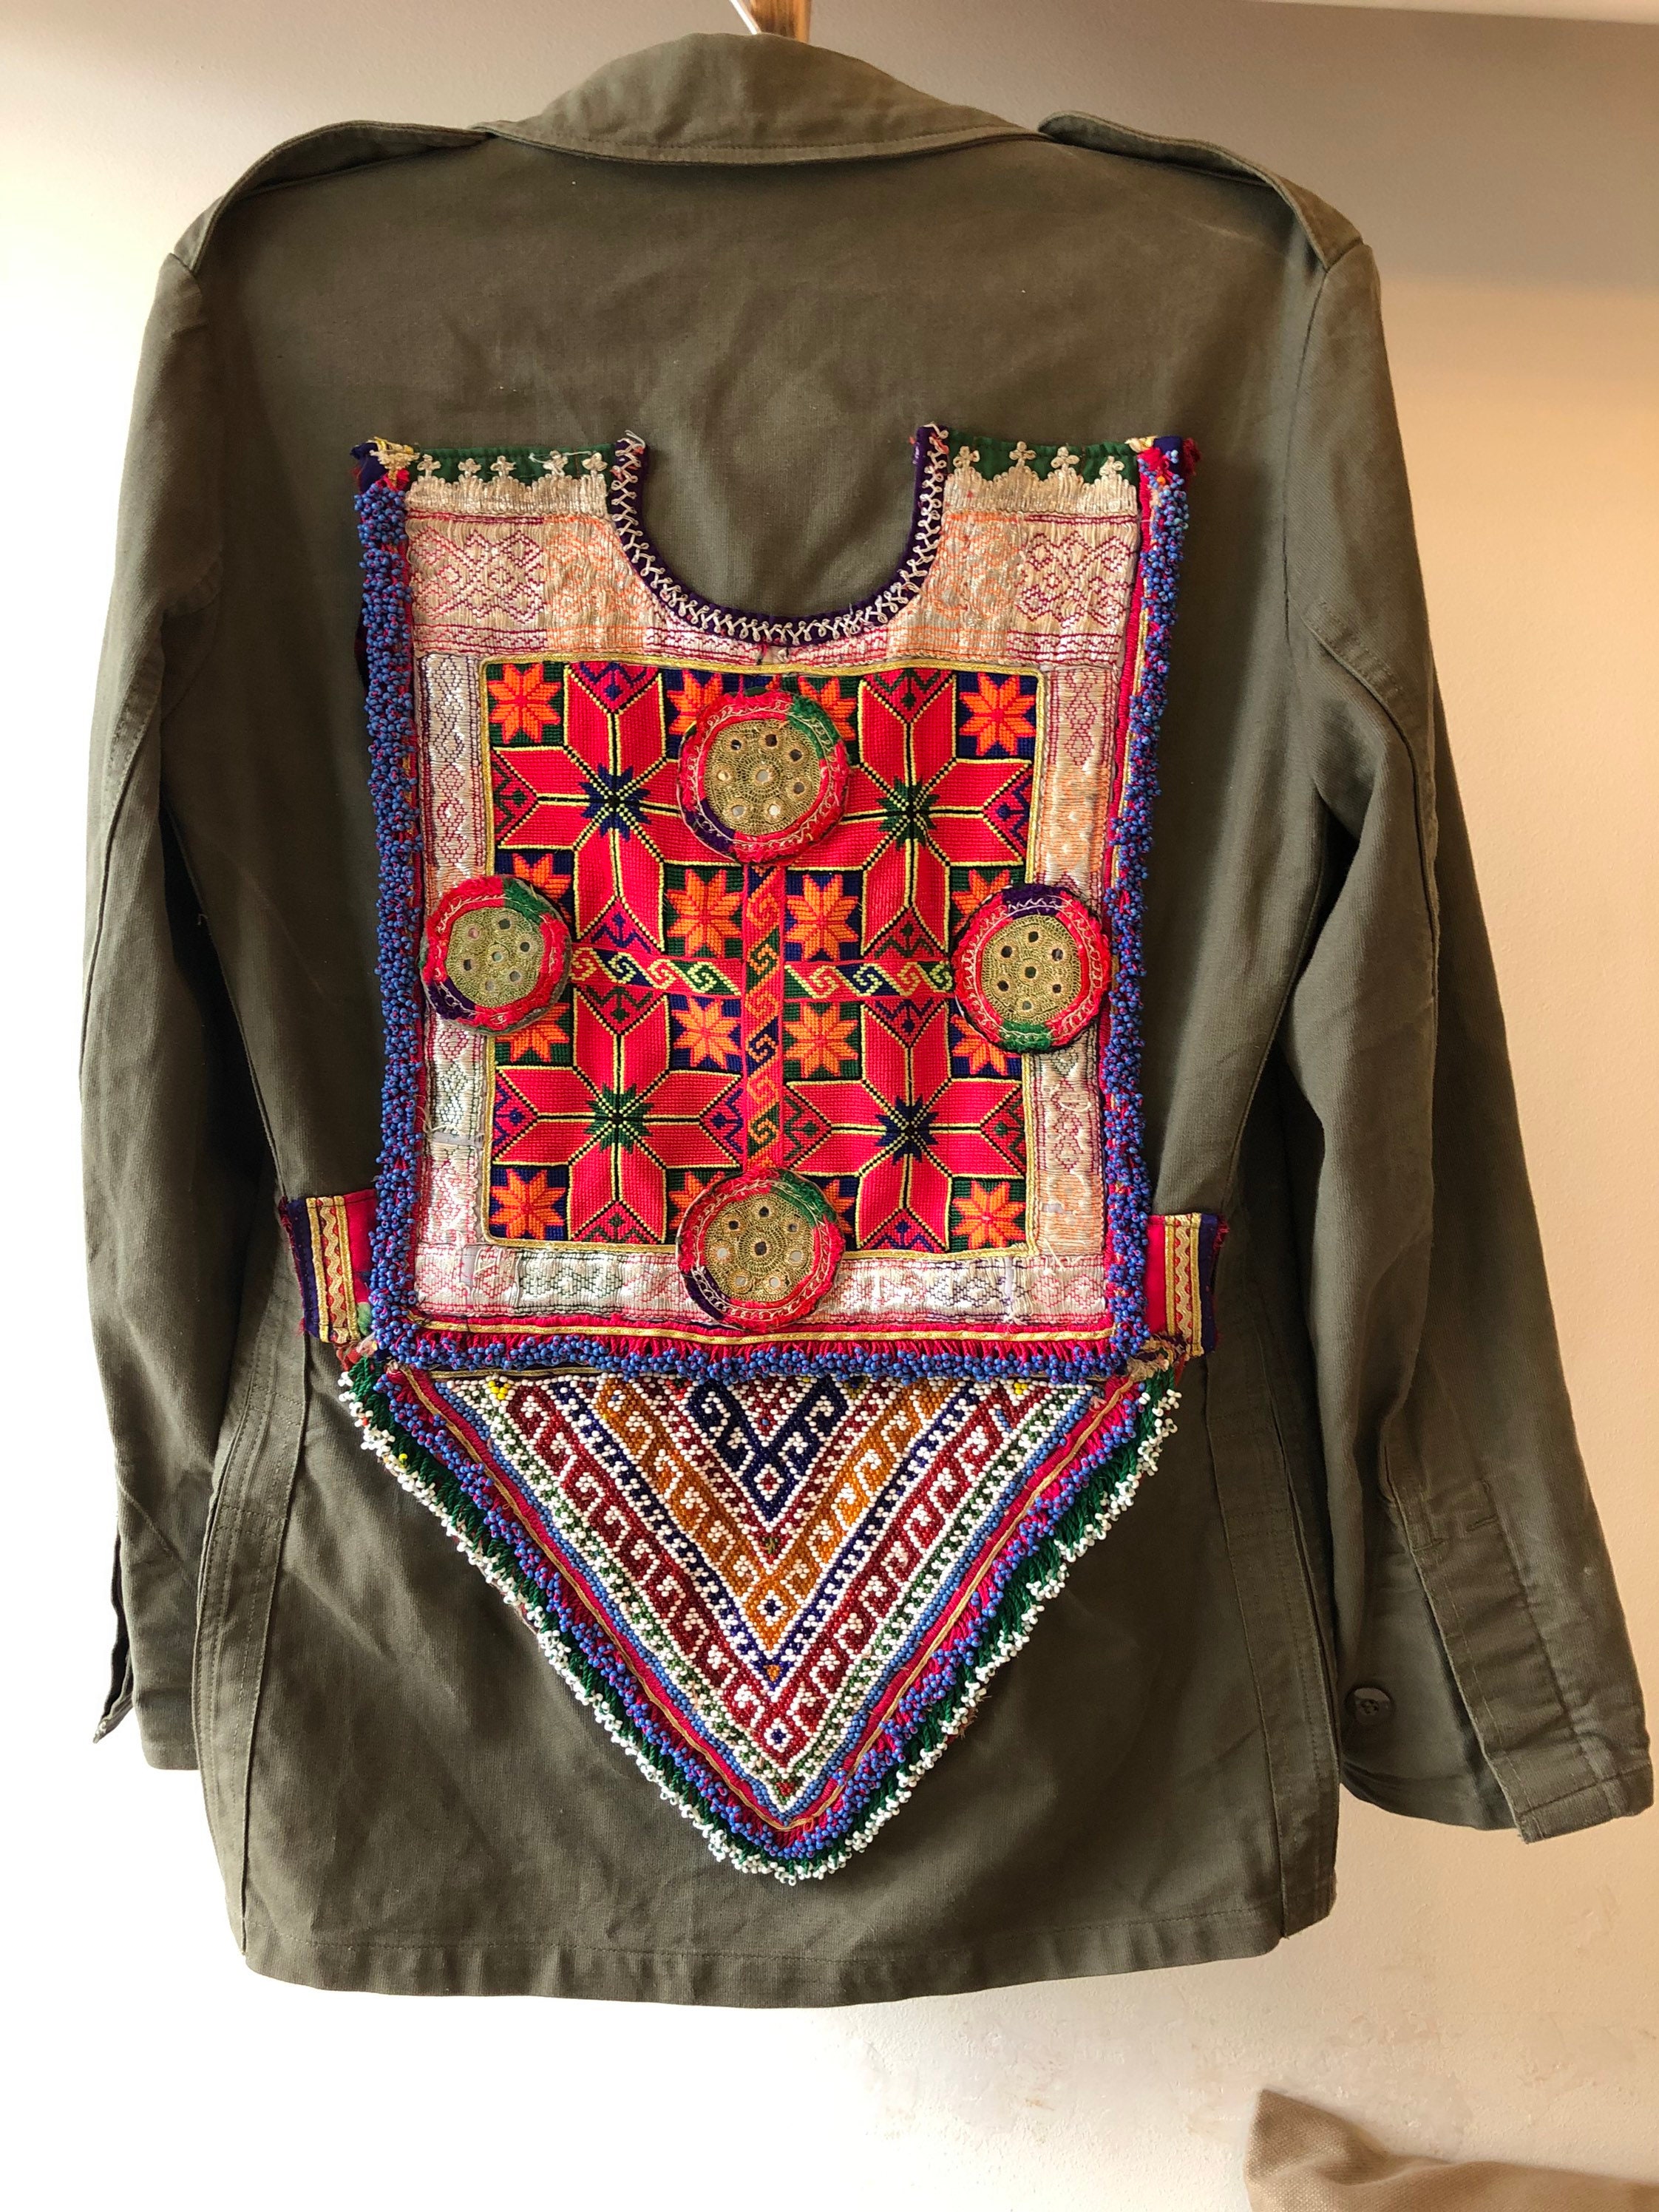 Monikmo Vintage Embroidered Jacket In Army Green At SWANK | islamiyyat.com